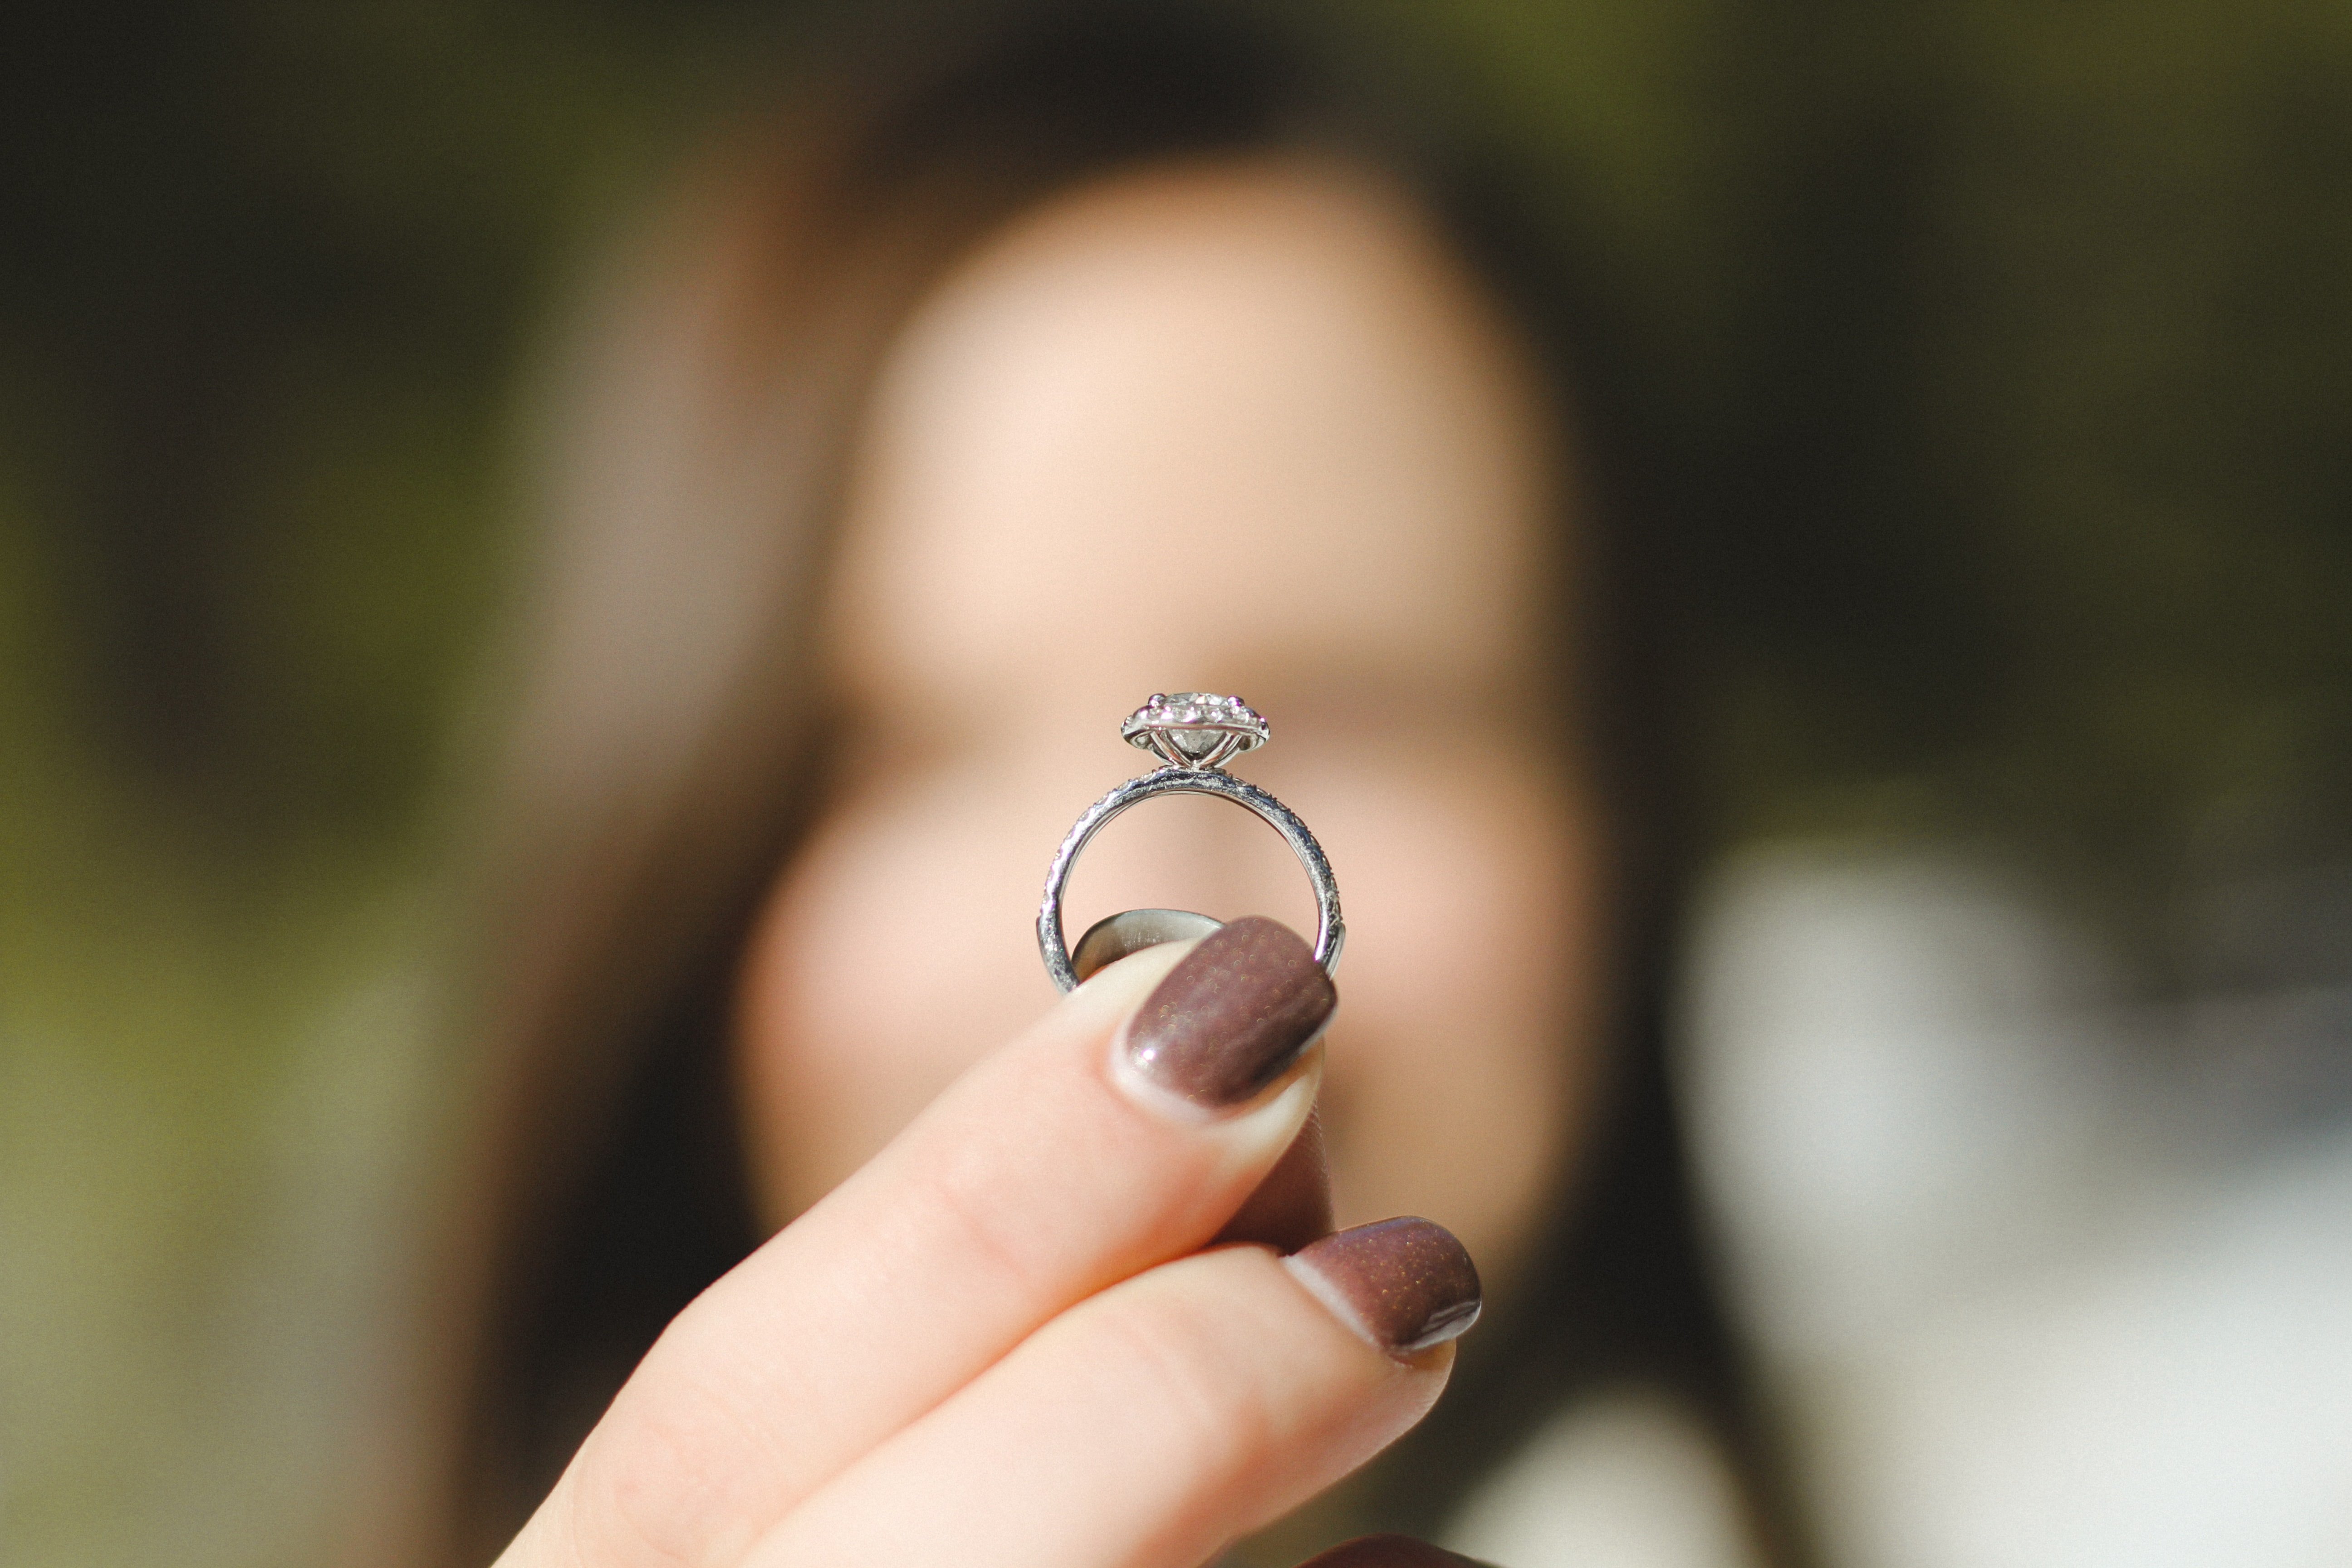 OP's cousin stole her grandma's jewelry, as well as her engagement ring. | Source: Unsplash 